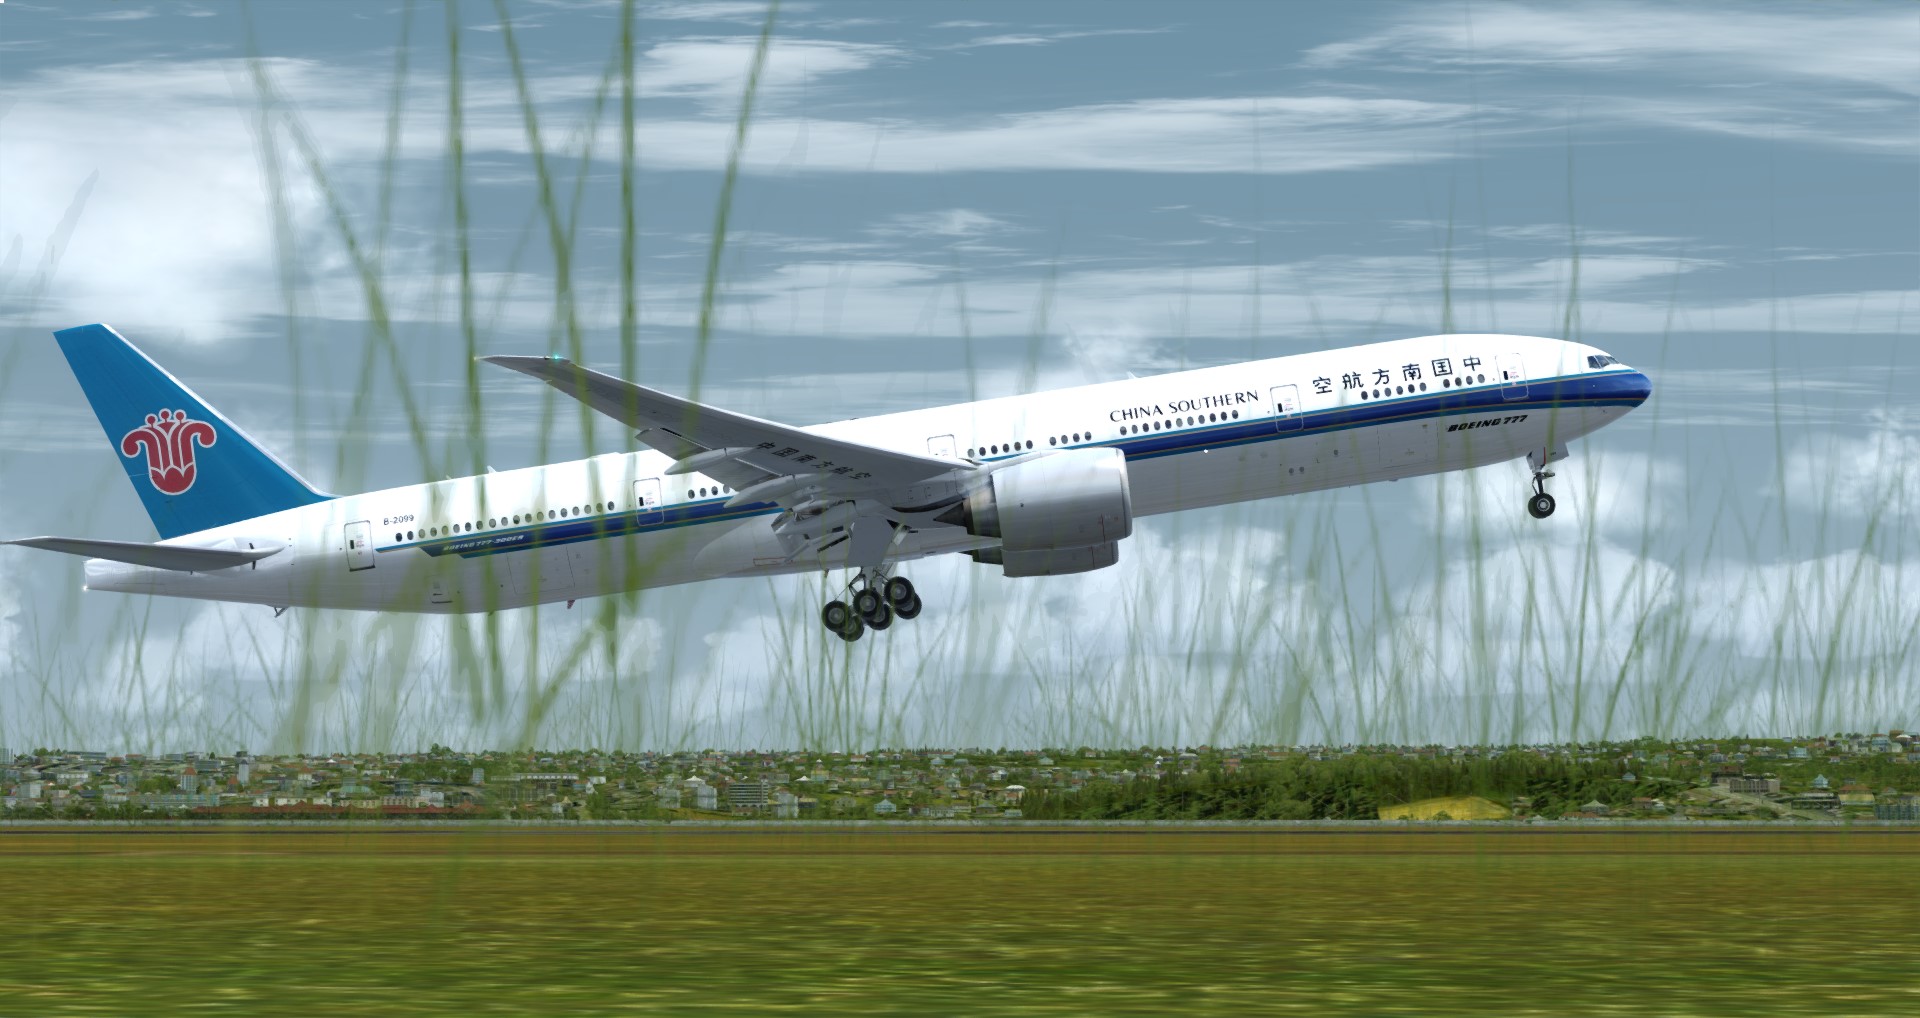 P3D V4 77W China Southern Airlines WADD-ZGGG 营救同胞-2141 